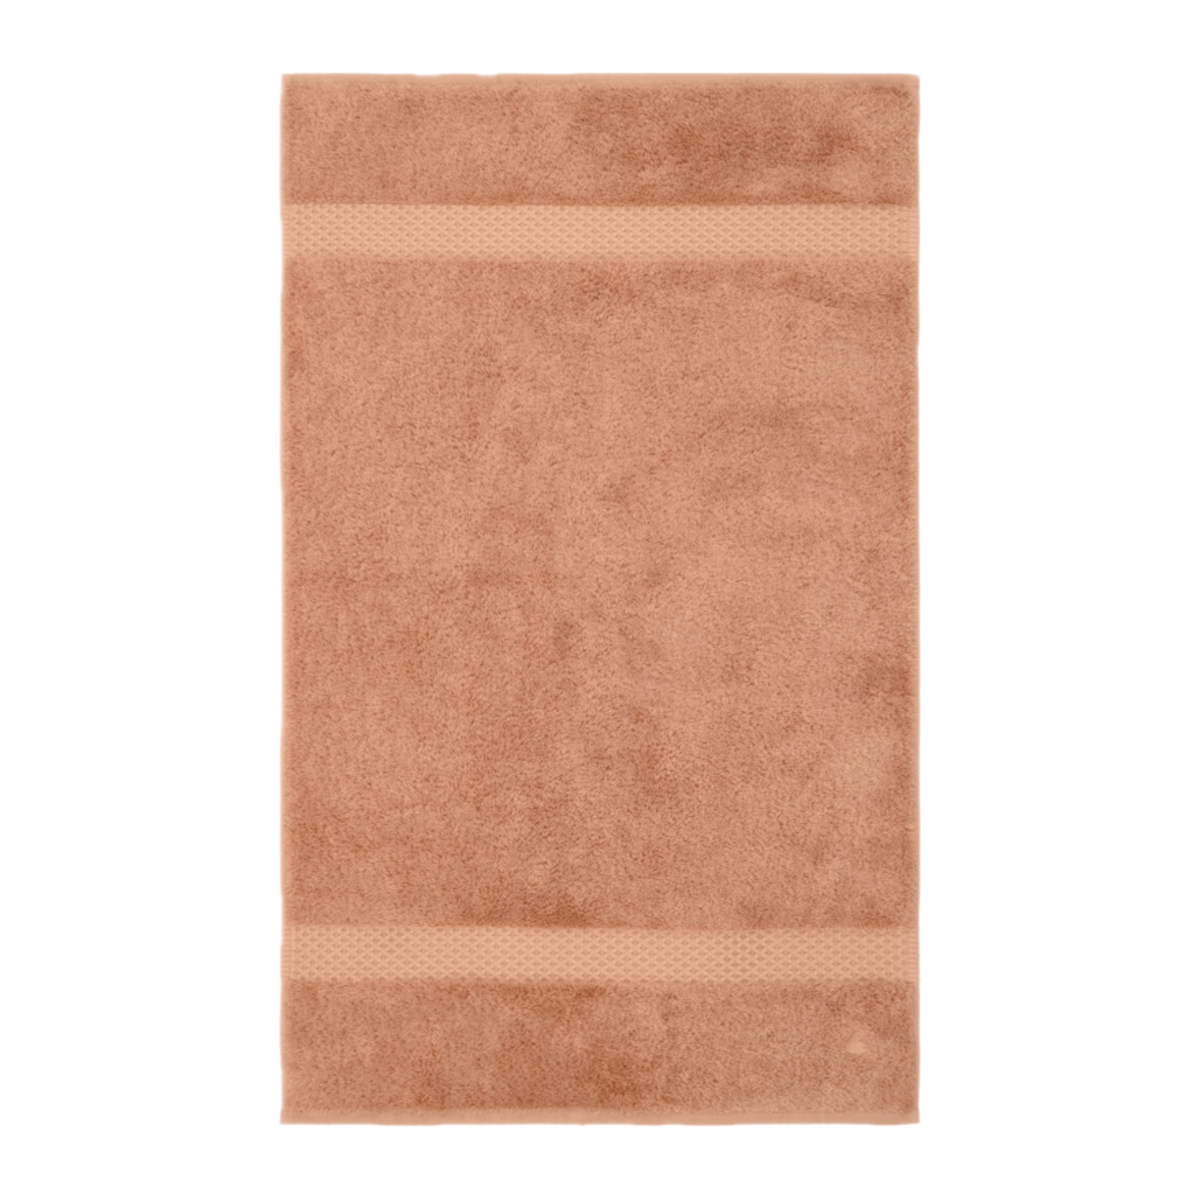 Bath Towel of Yves Delorme Etoile Bath Collection in Sienna Color